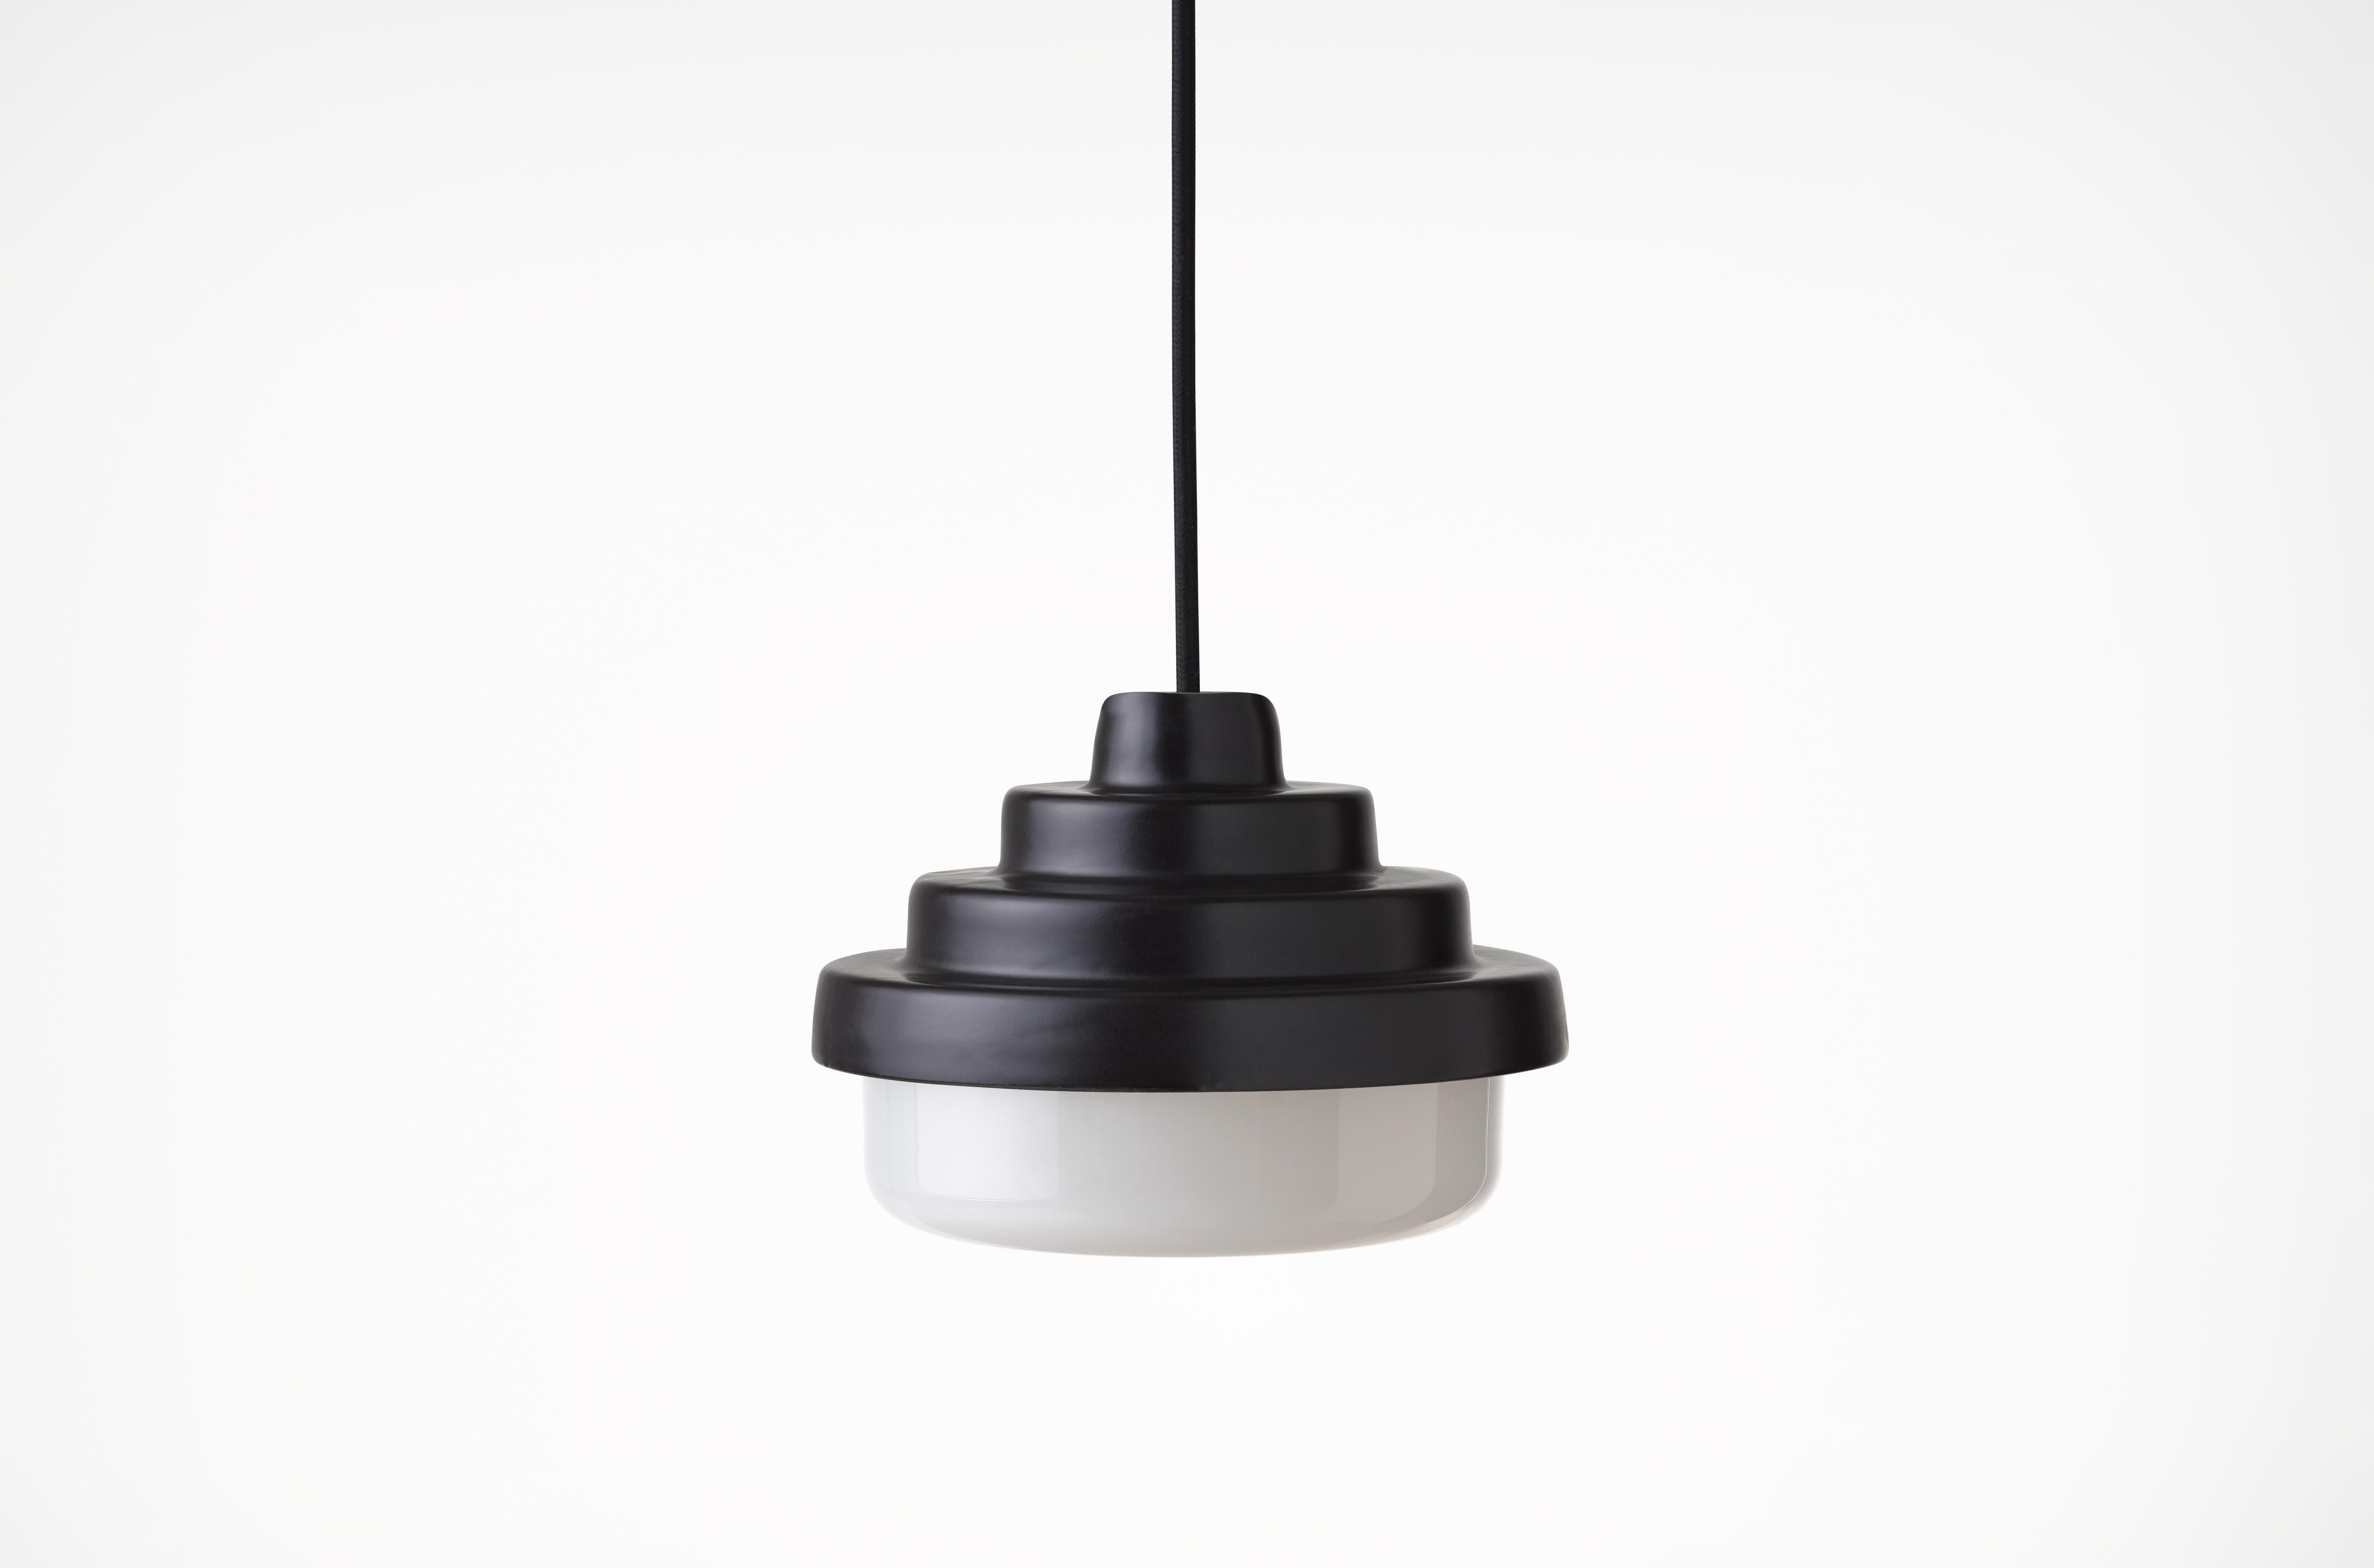 Black and White Honey Pendant Light by Coco Flip
Dimensions: D 18 x W 18 x H 13 cm
Materials: Slip cast ceramic stoneware with blown glass. 
Weight: Approx. 2kg
Glass finishes: White
Ceramic finishes: Black satin glaze. 


Coco Flip is a Melbourne